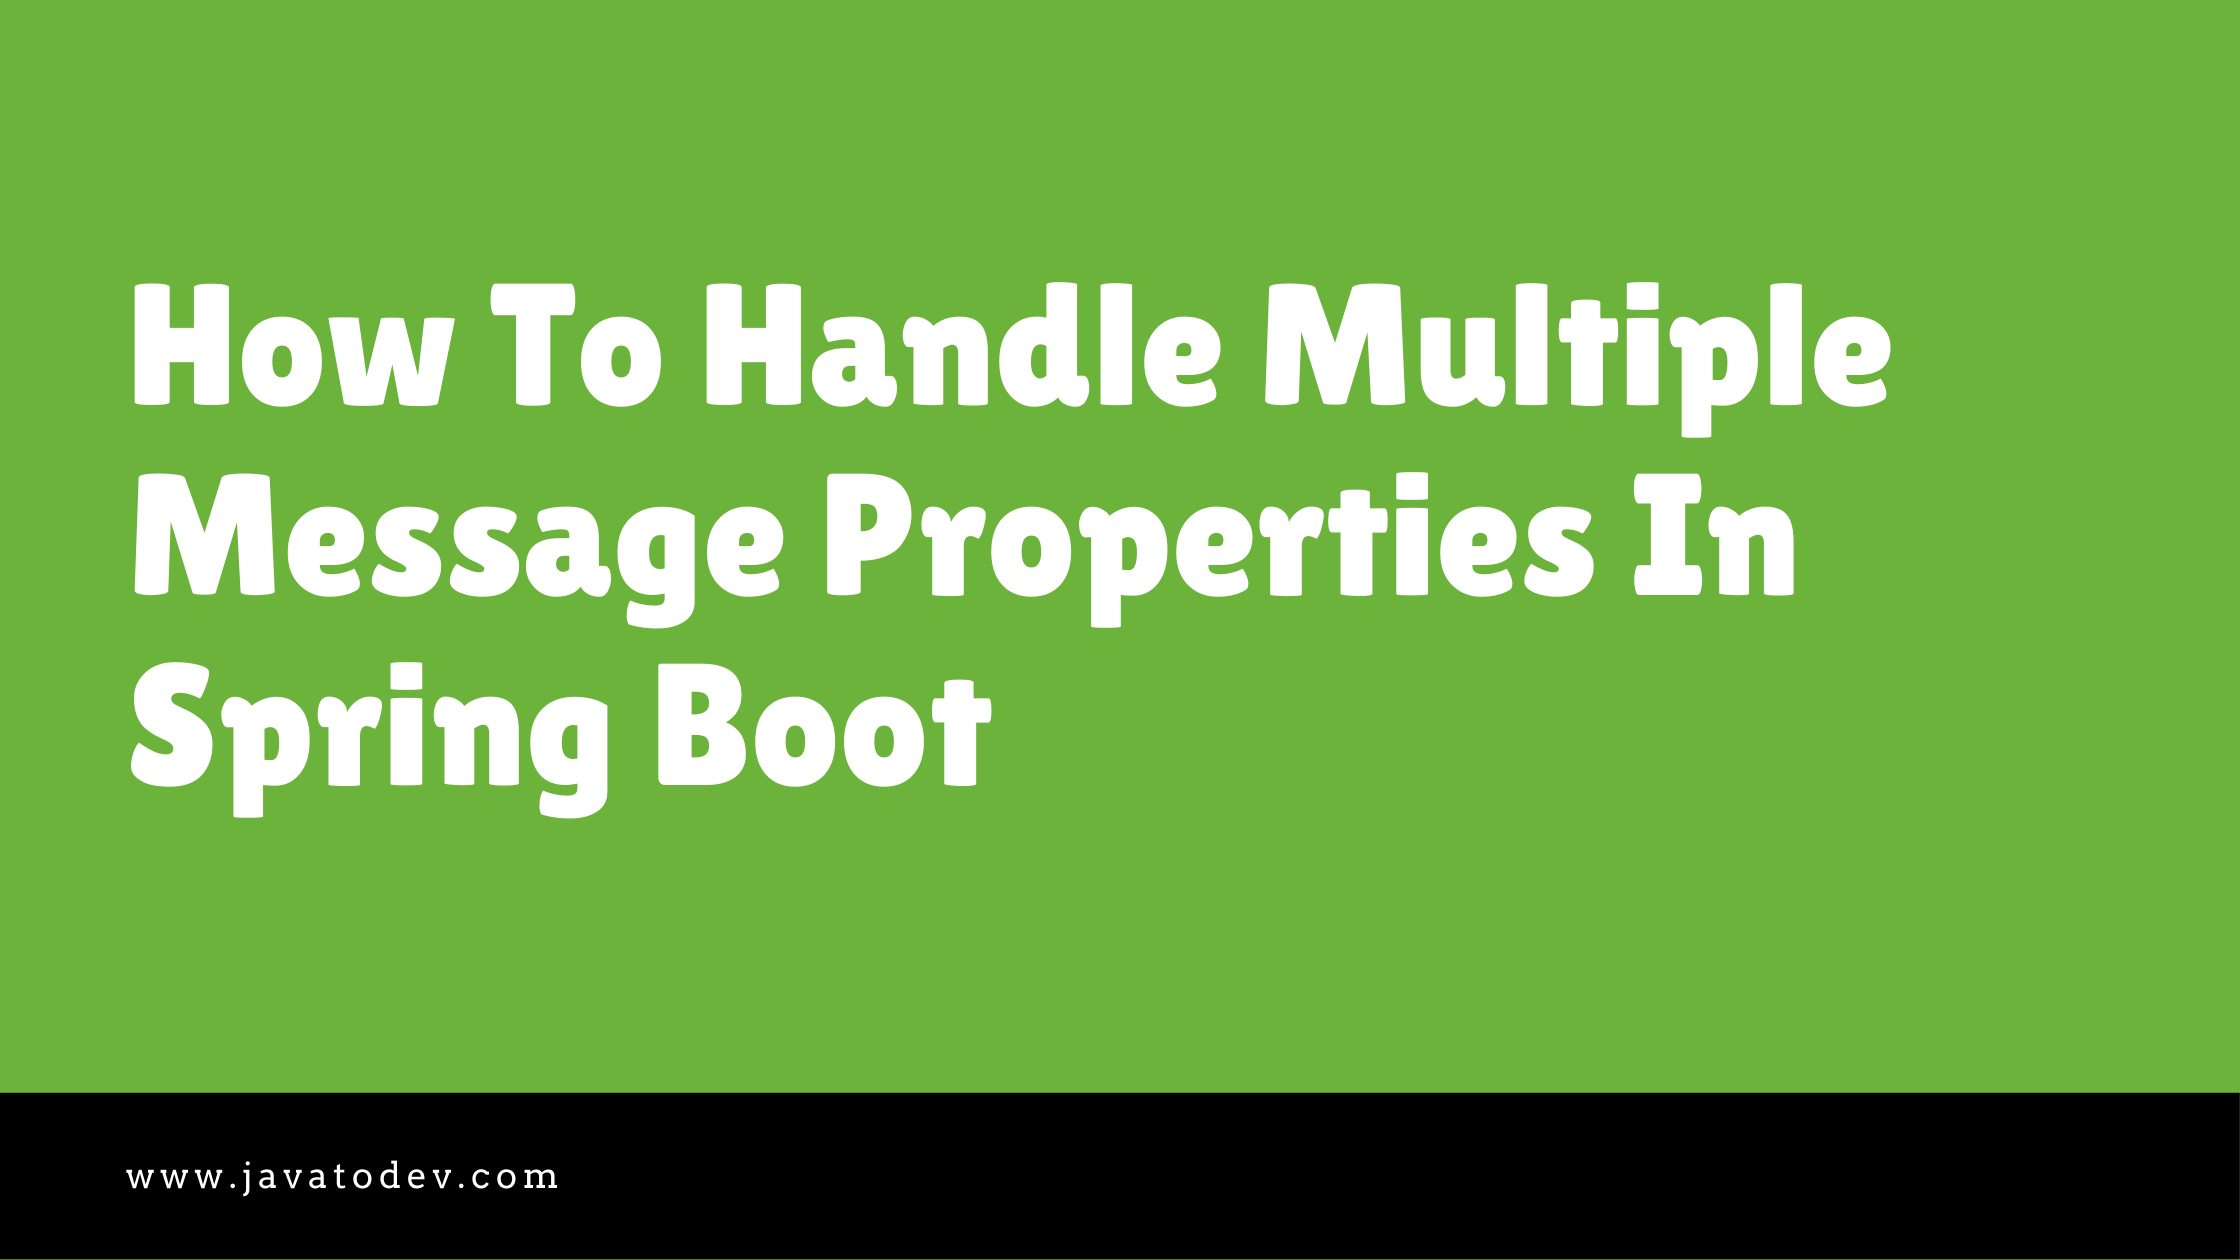 How To Handle Multiple Message Properties In Spring Boot